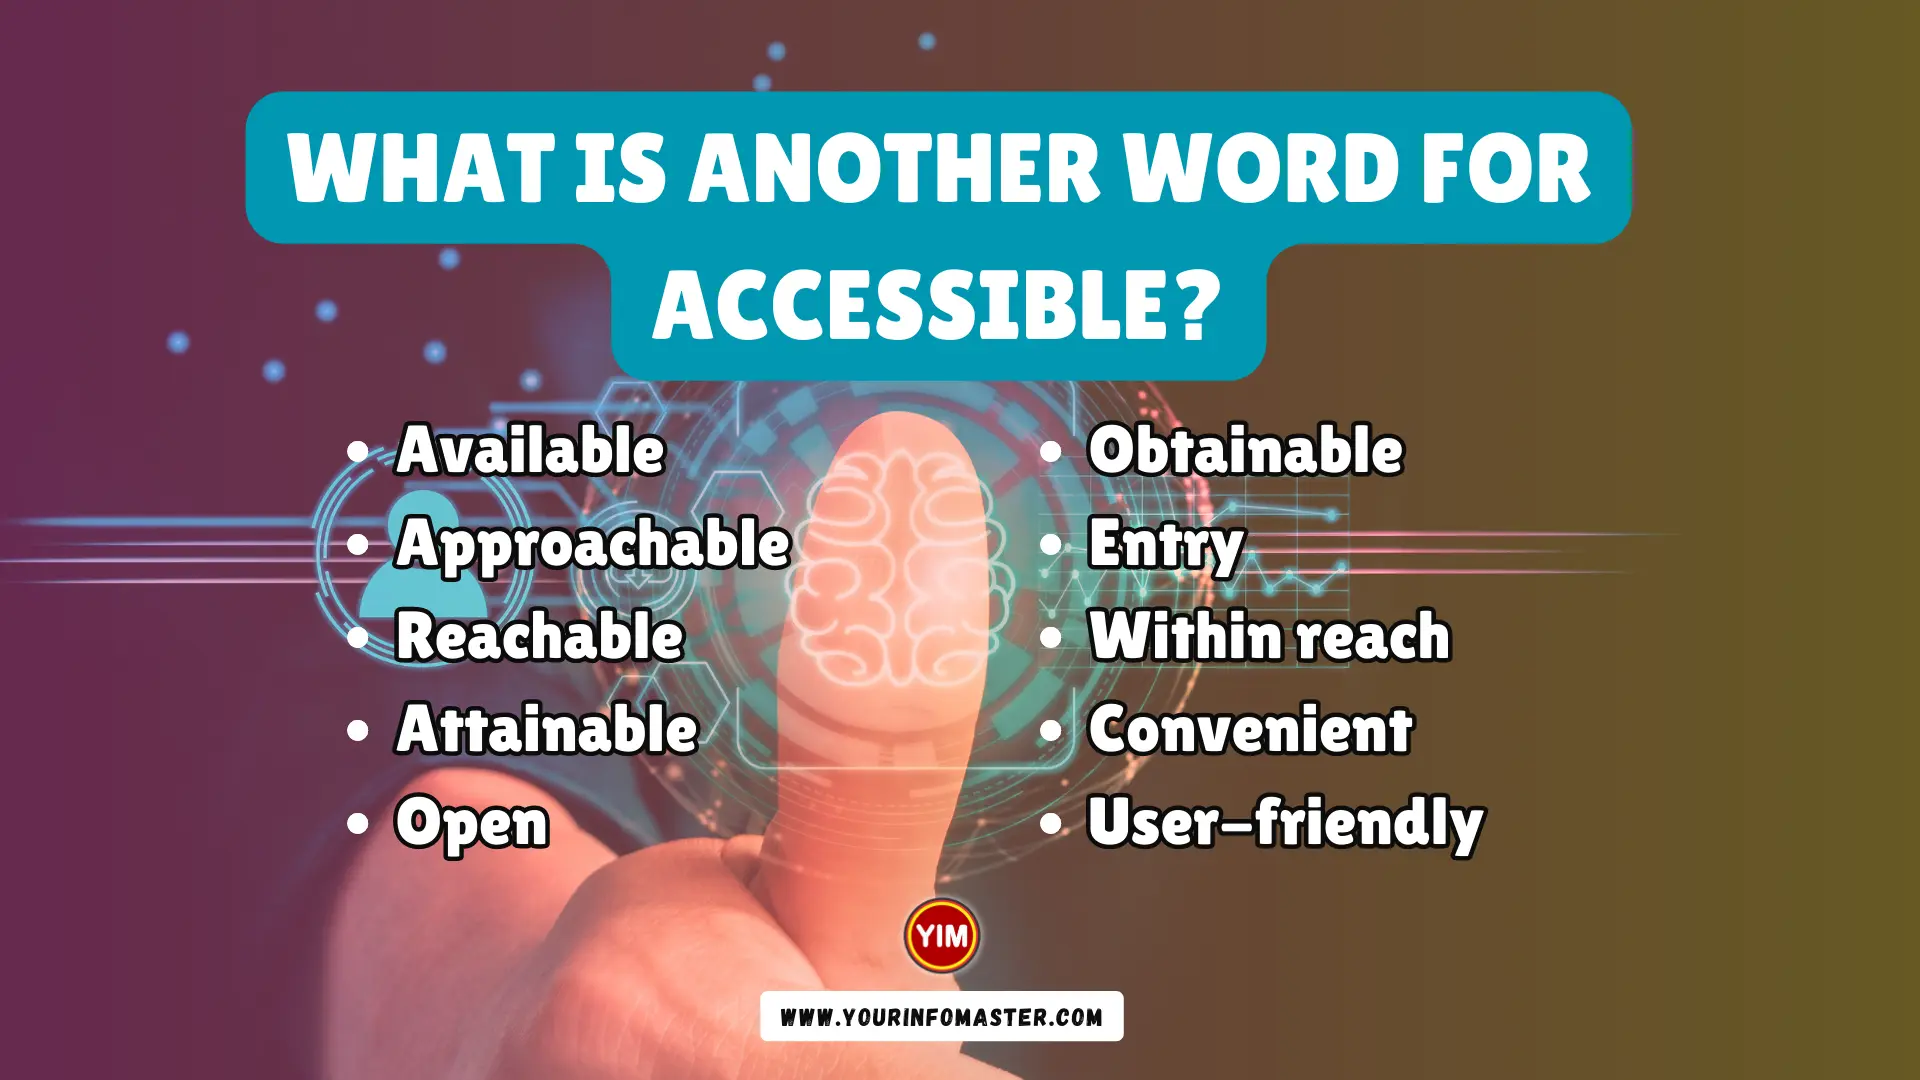 What is another word for Accessible